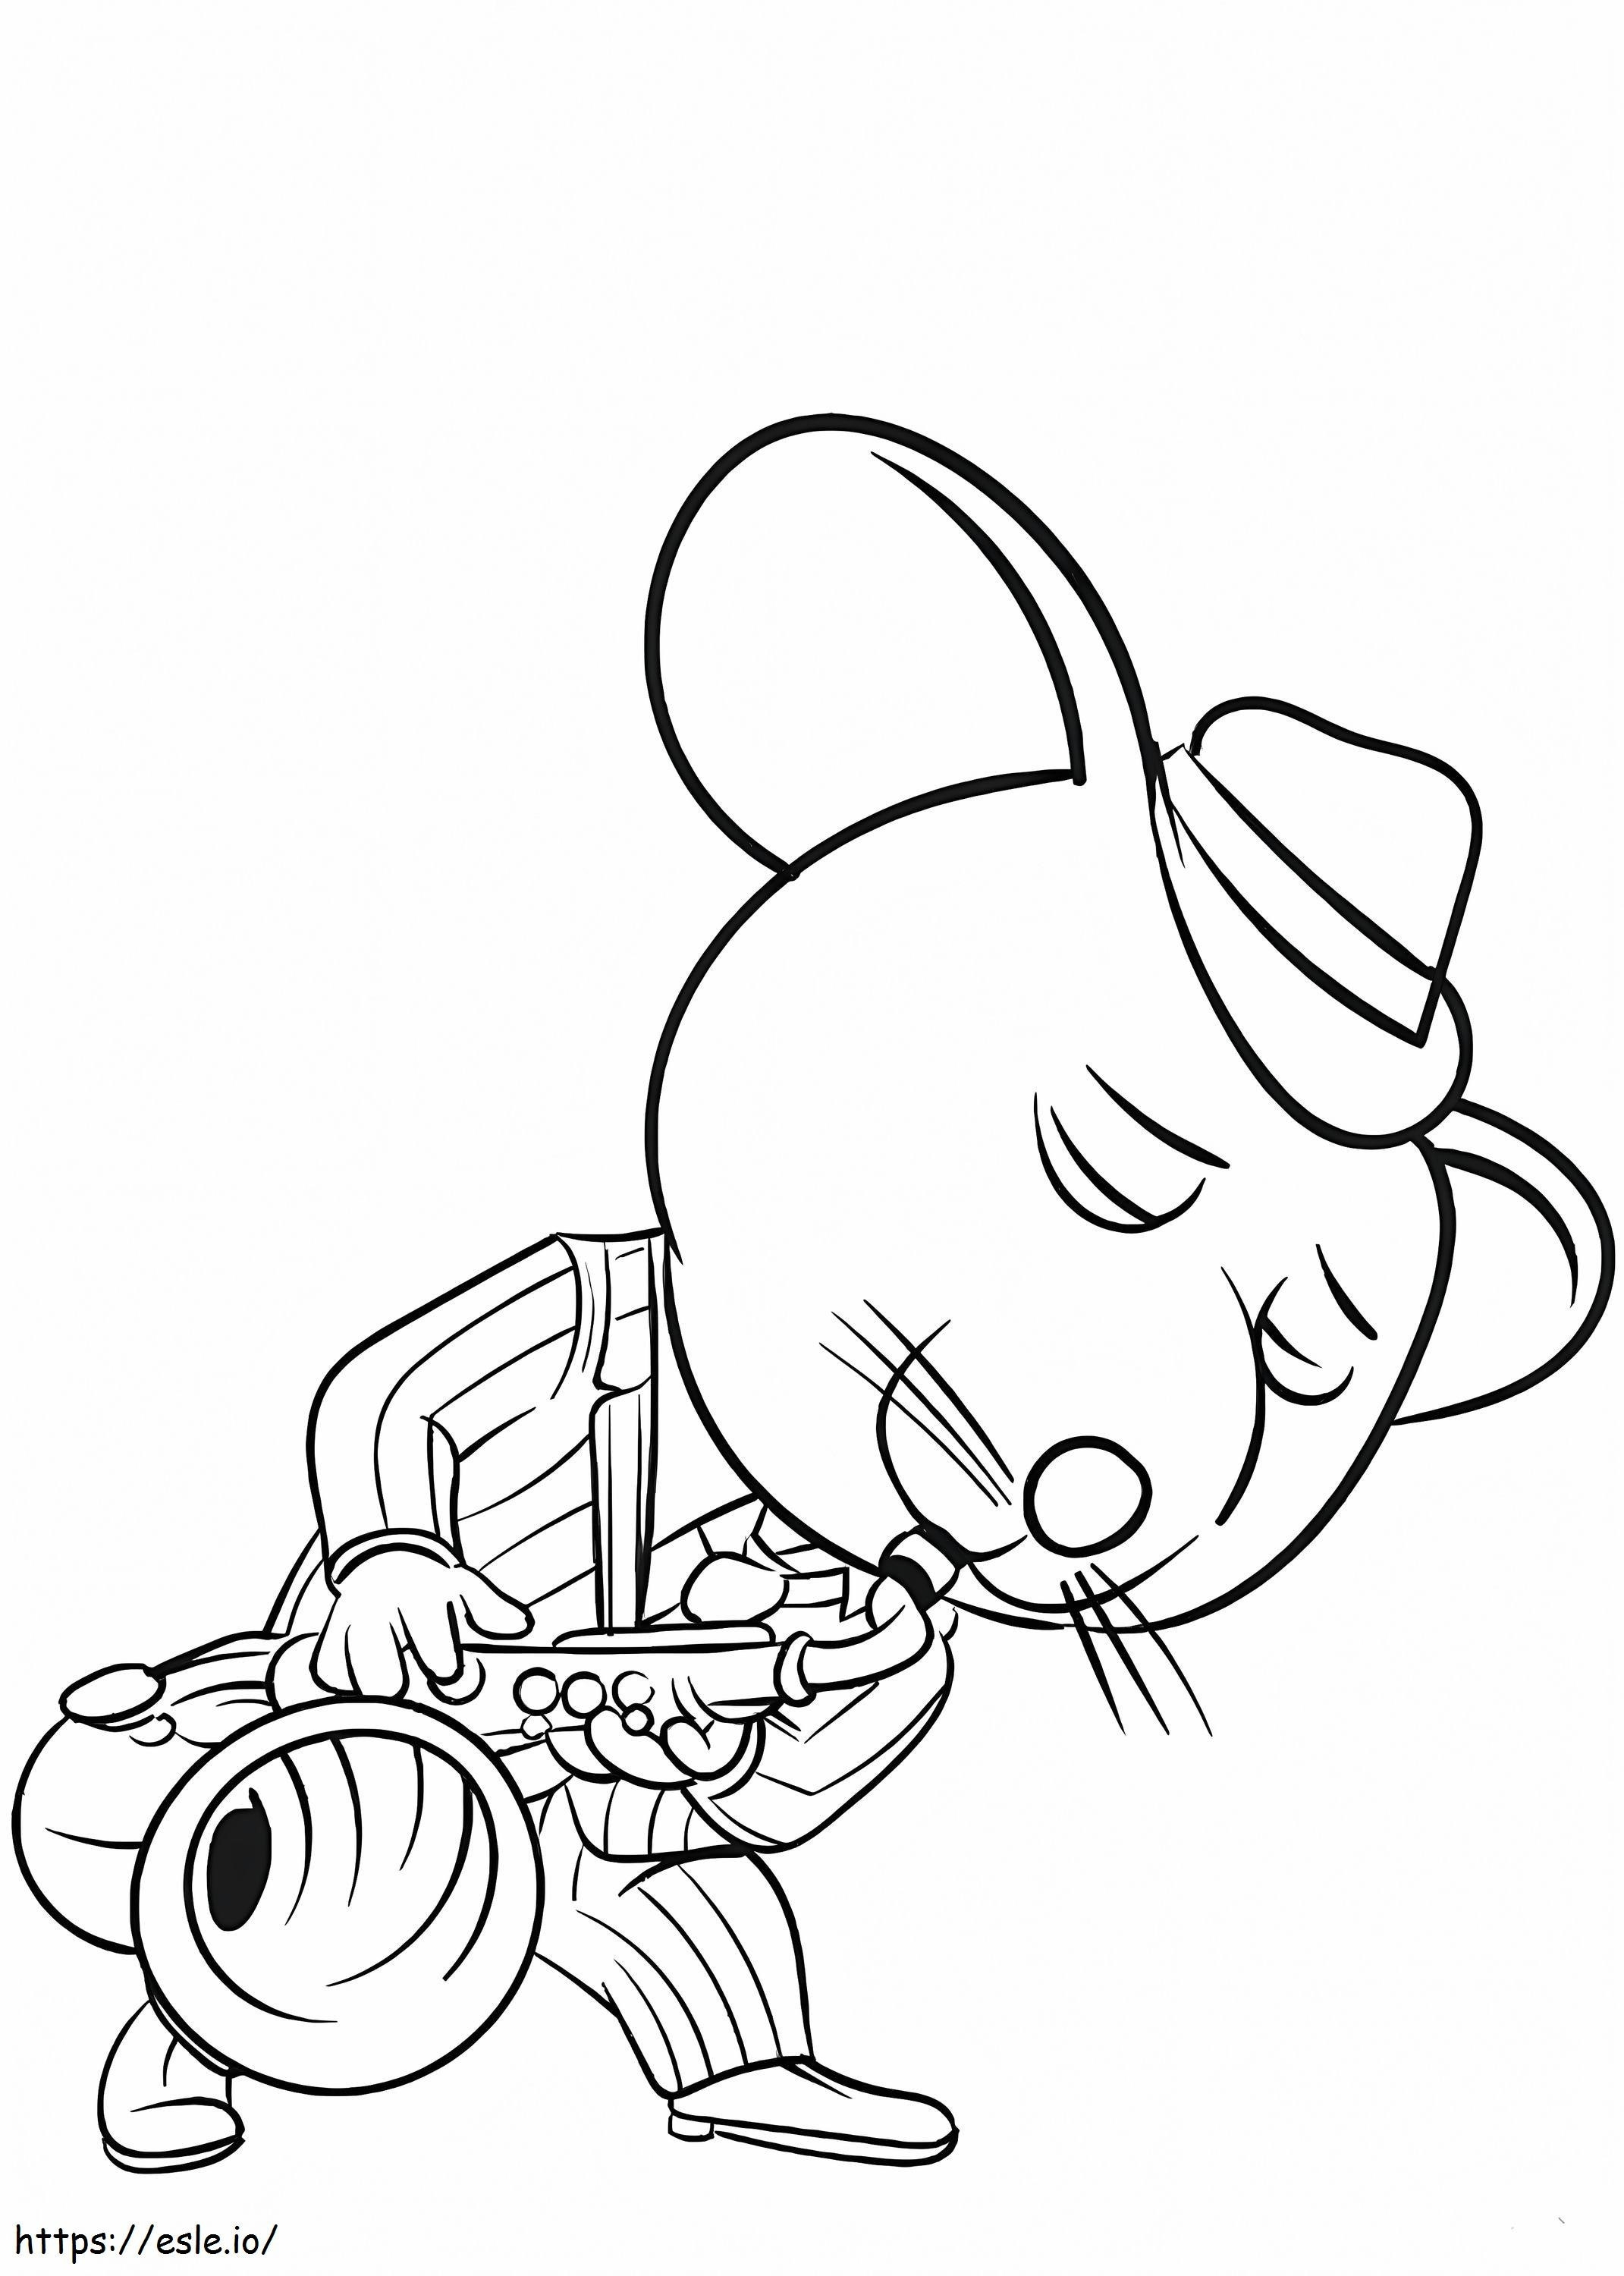 Mouse Playing Saxophone coloring page